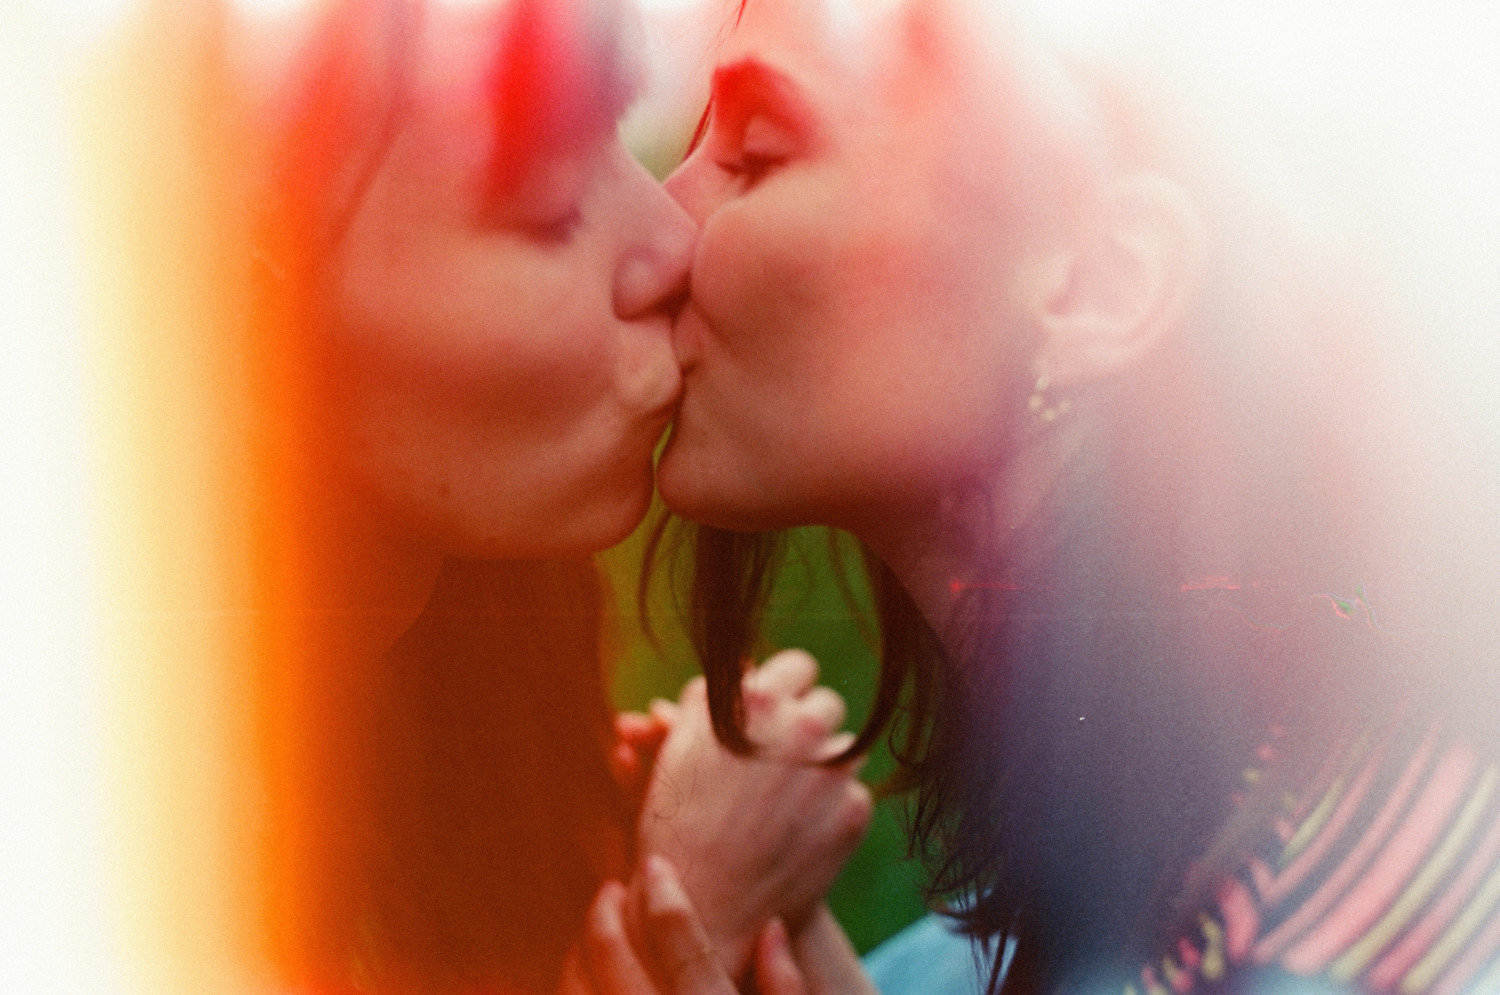 a photograph of two women kissing with reddish light flares coming in on each side